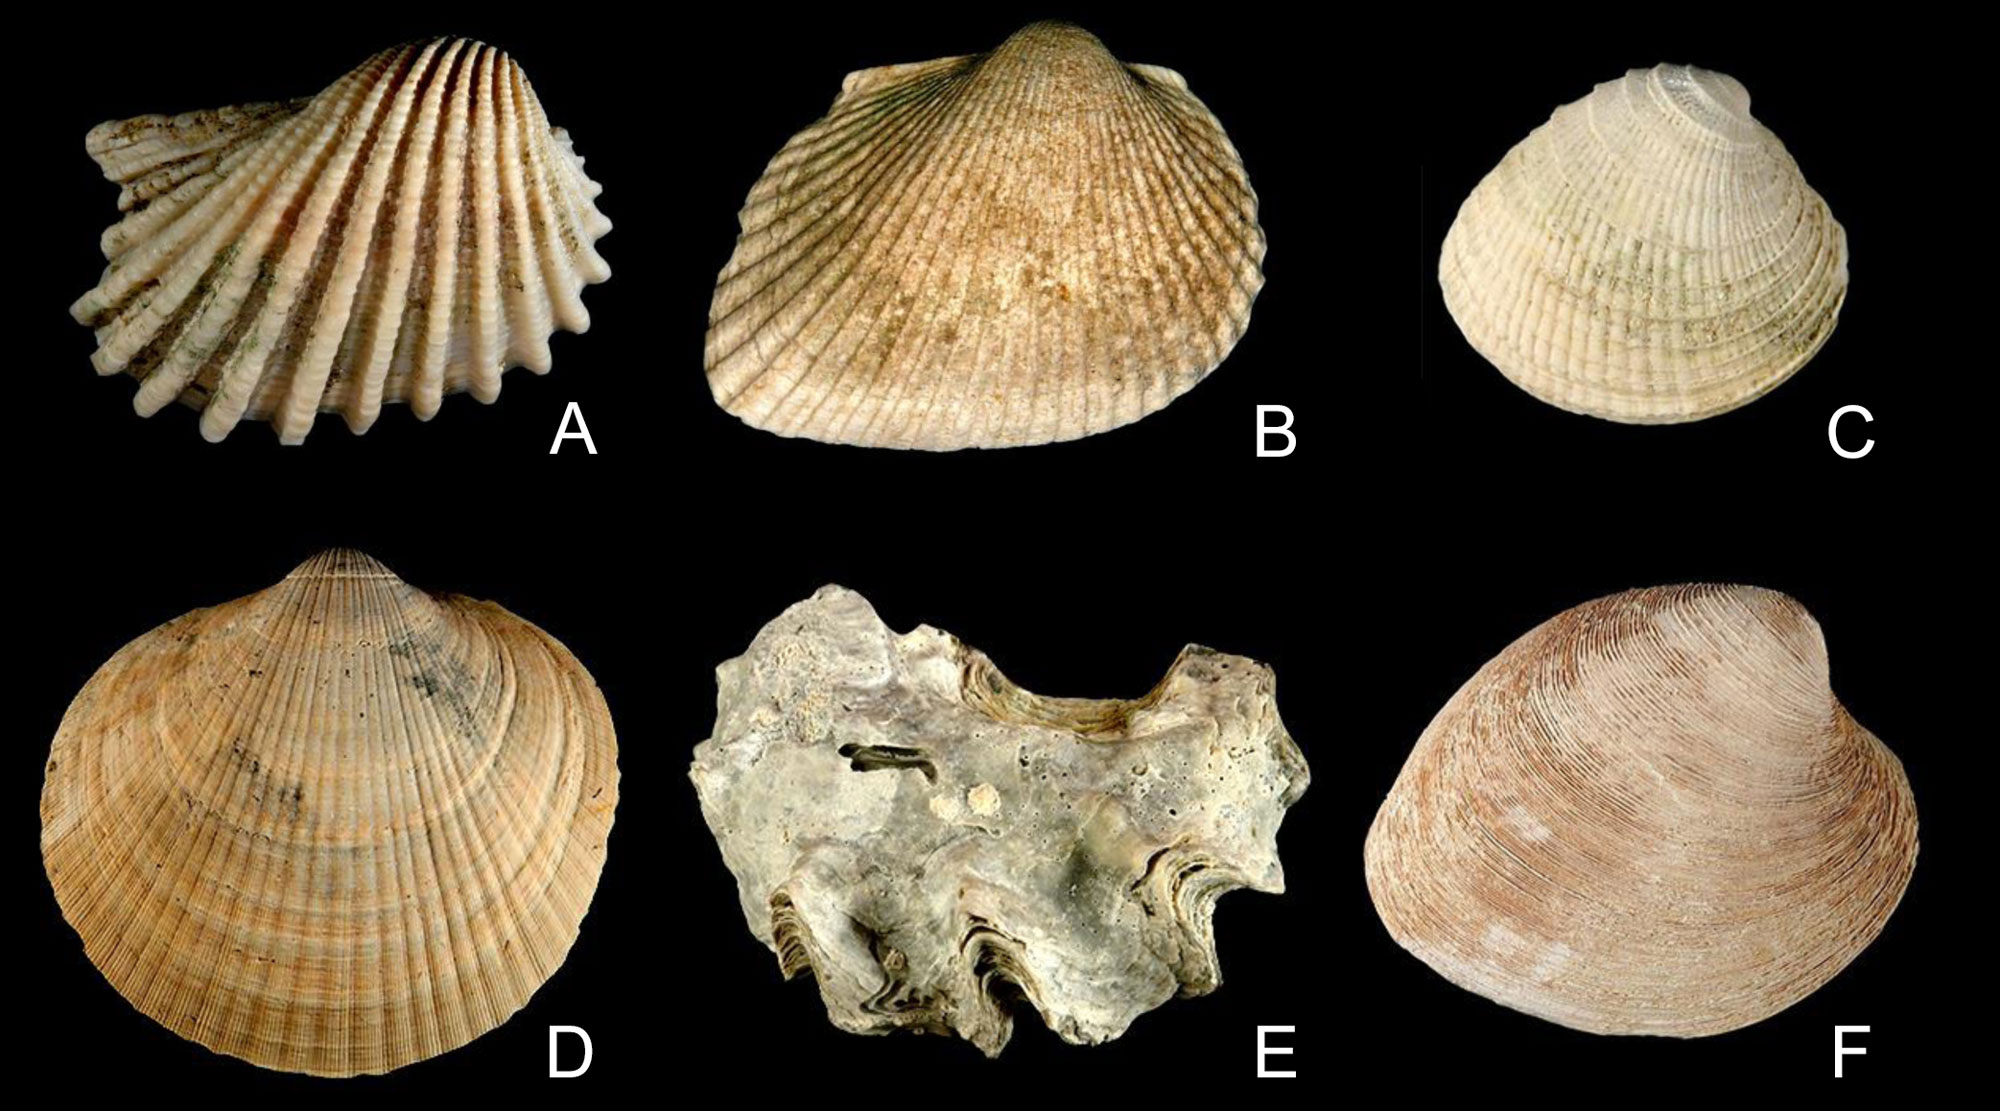 Photographic figure with images of six bivalve shells from the Pliocene to Pleistocene of Florida and the Carolinas.